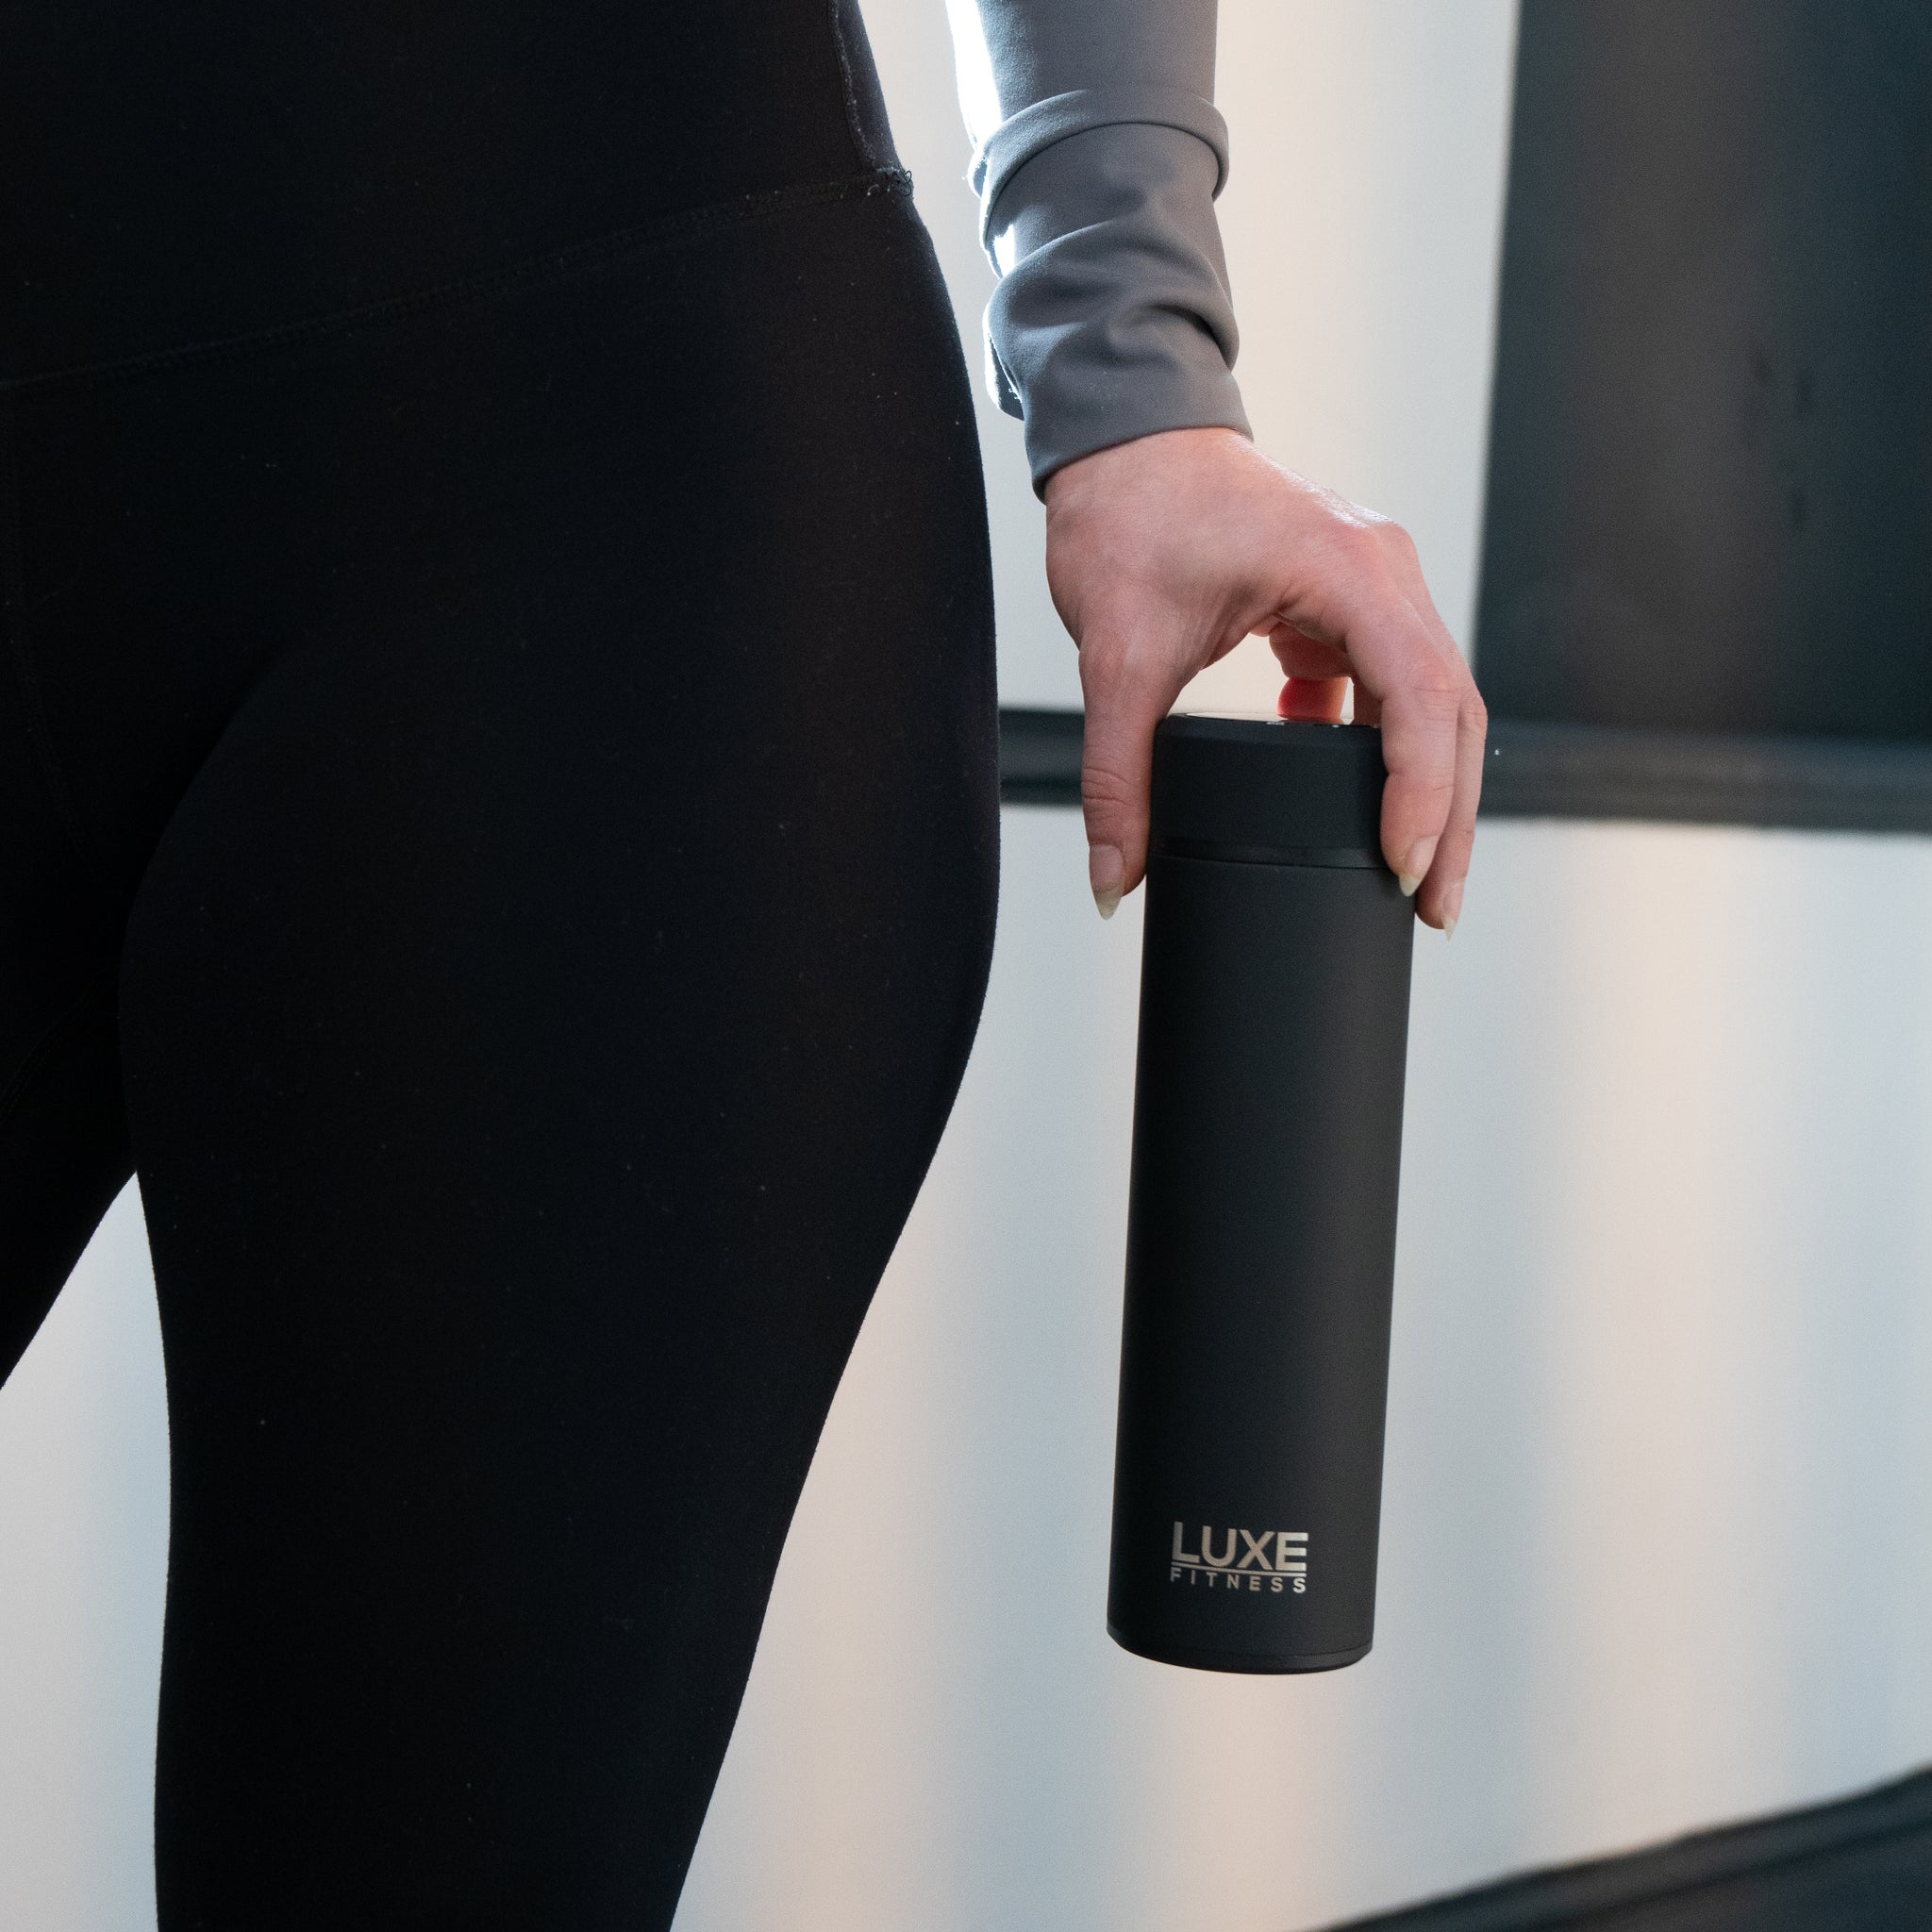 Thermos Water Bottle